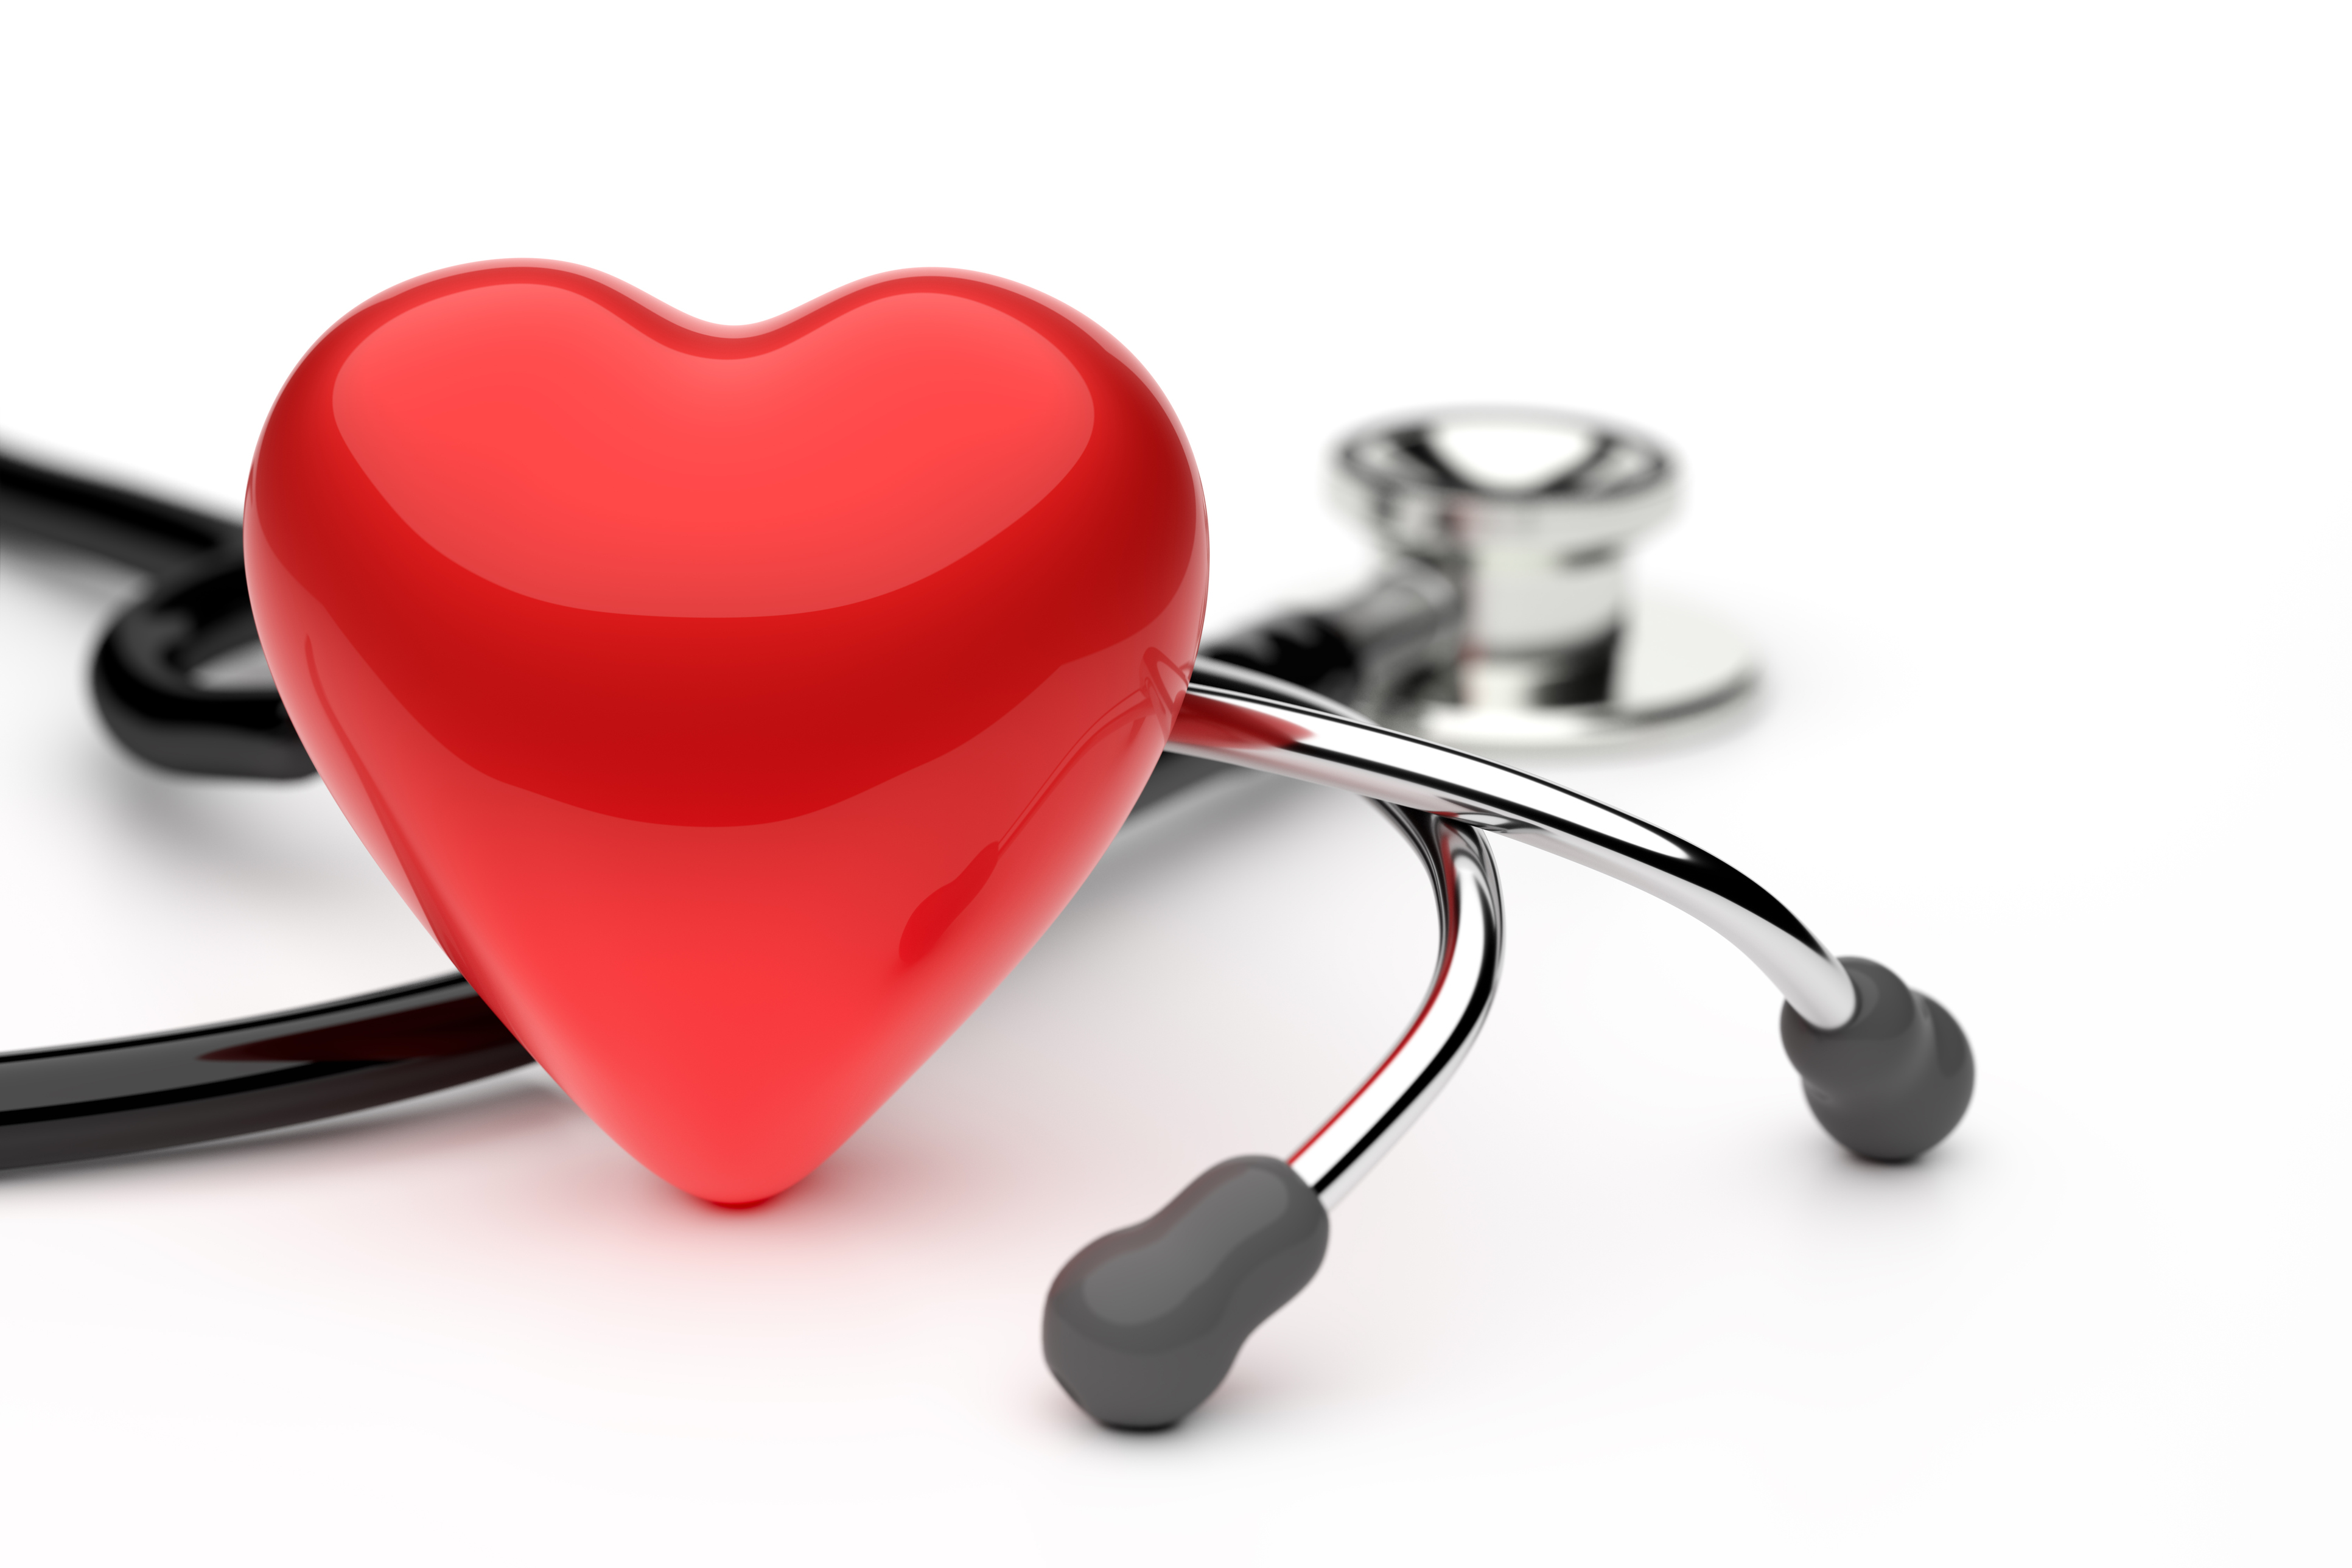 The Medical Relationship – Collaborating with your Partner in Career and Life